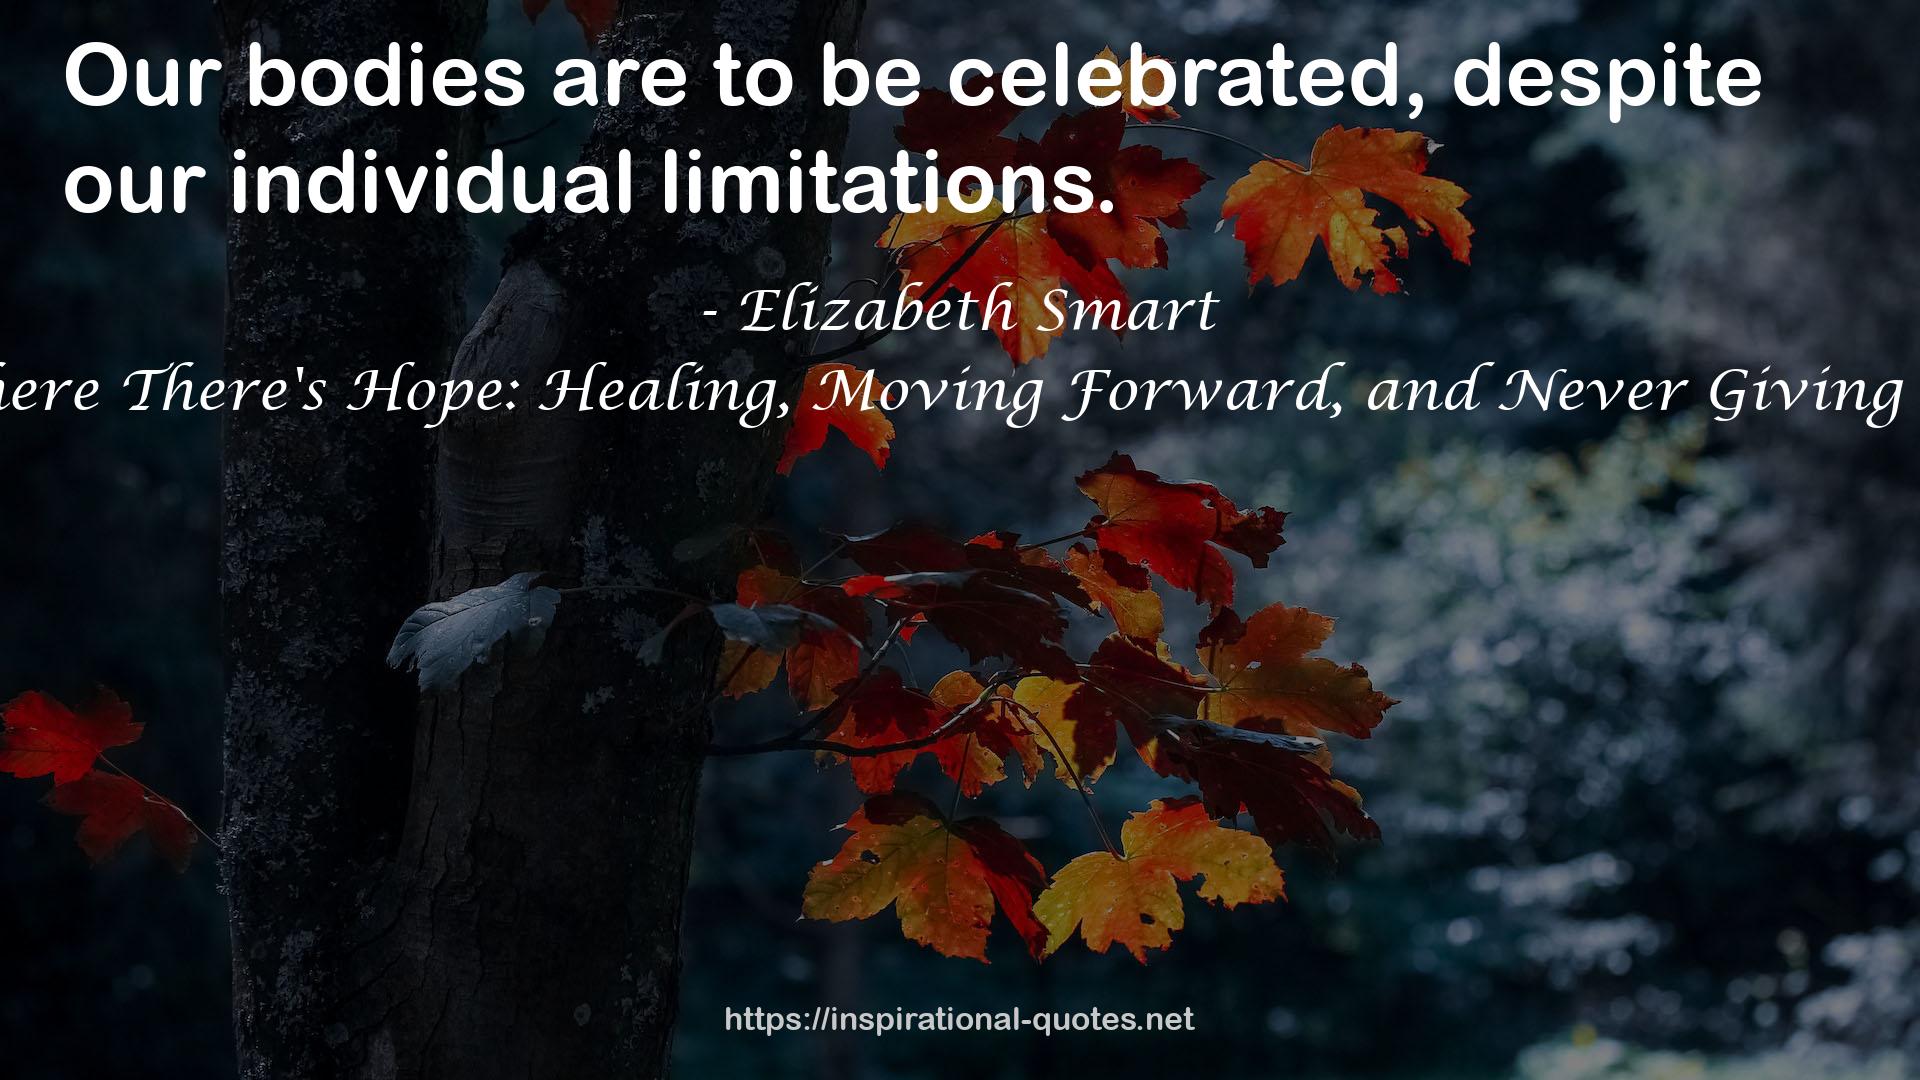 Where There's Hope: Healing, Moving Forward, and Never Giving Up QUOTES